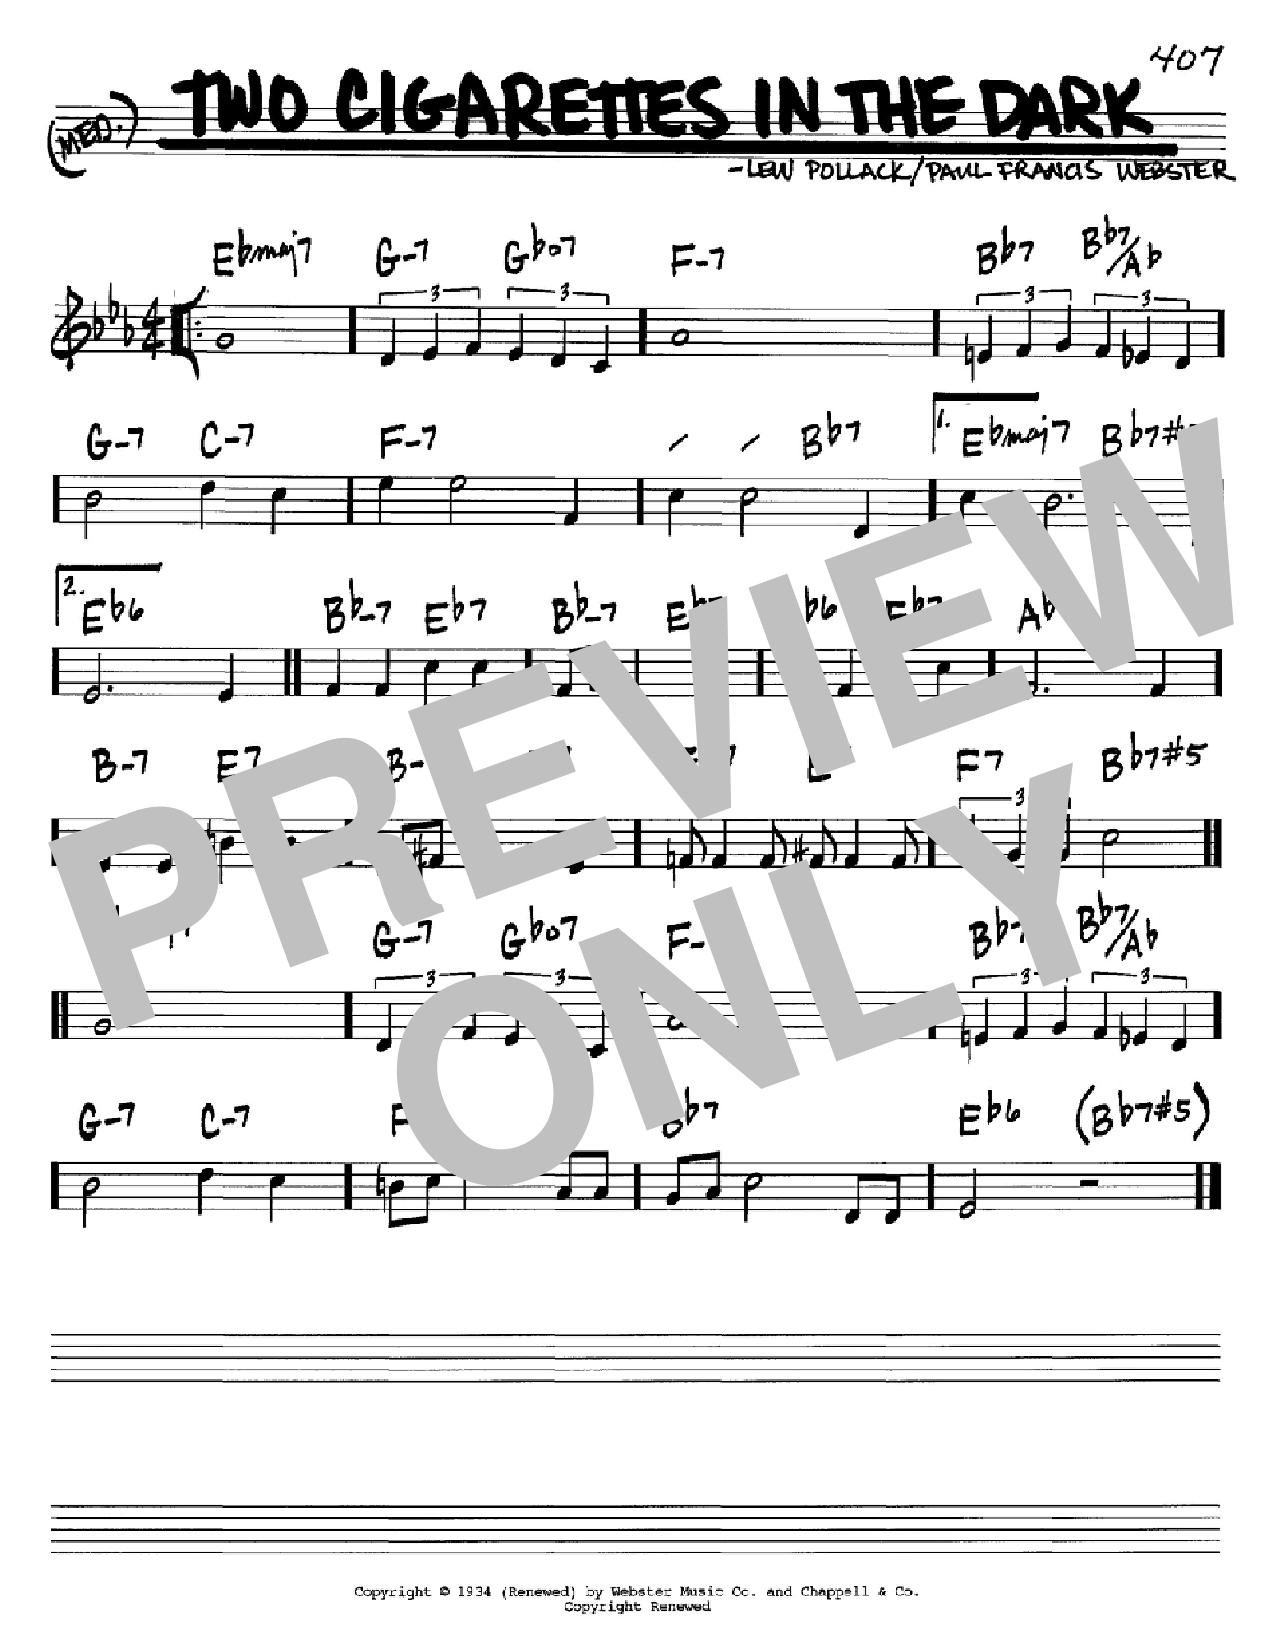 Download Paul Francis Webster Two Cigarettes In The Dark Sheet Music